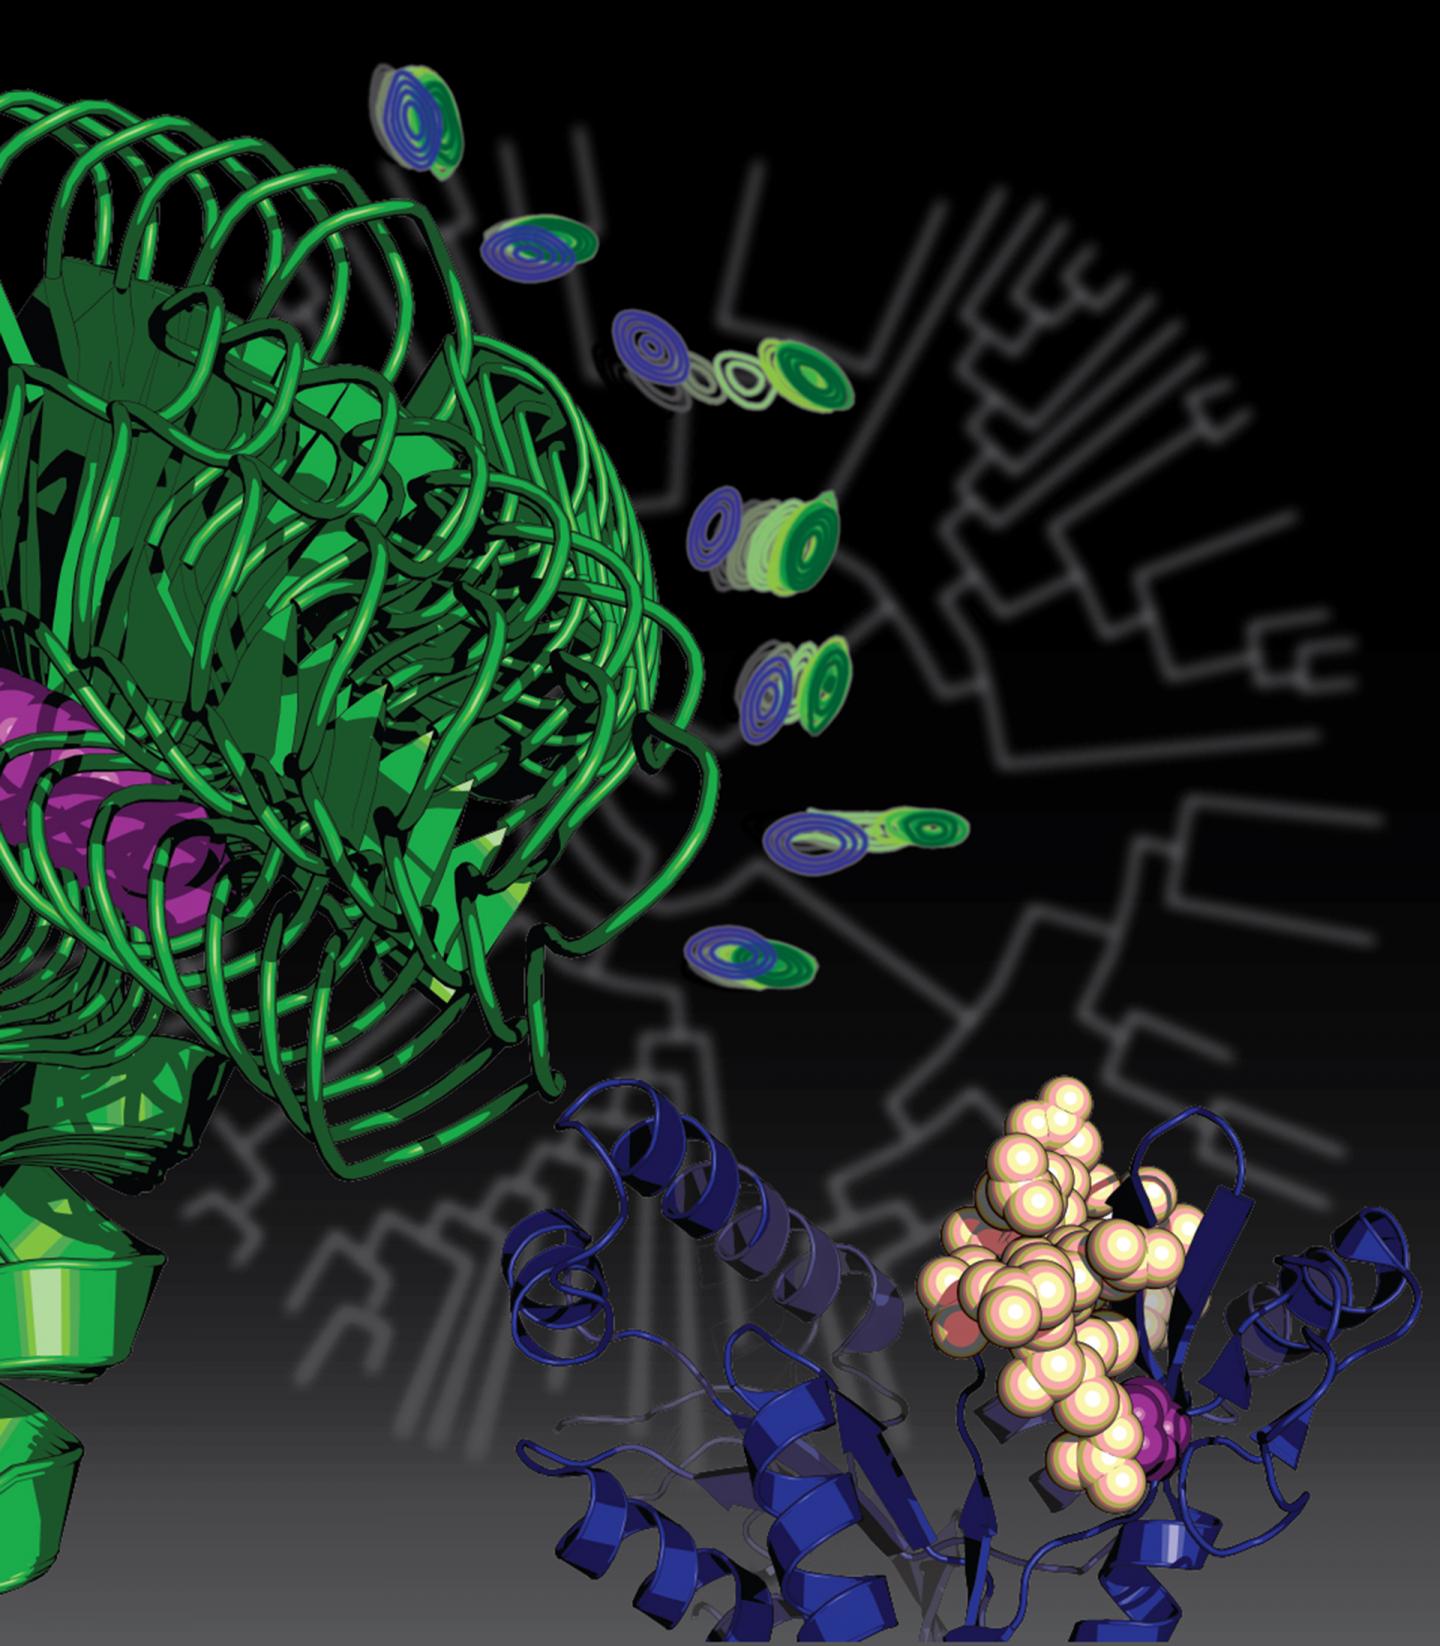 How a Mutation Changed a Protein and Life's Course